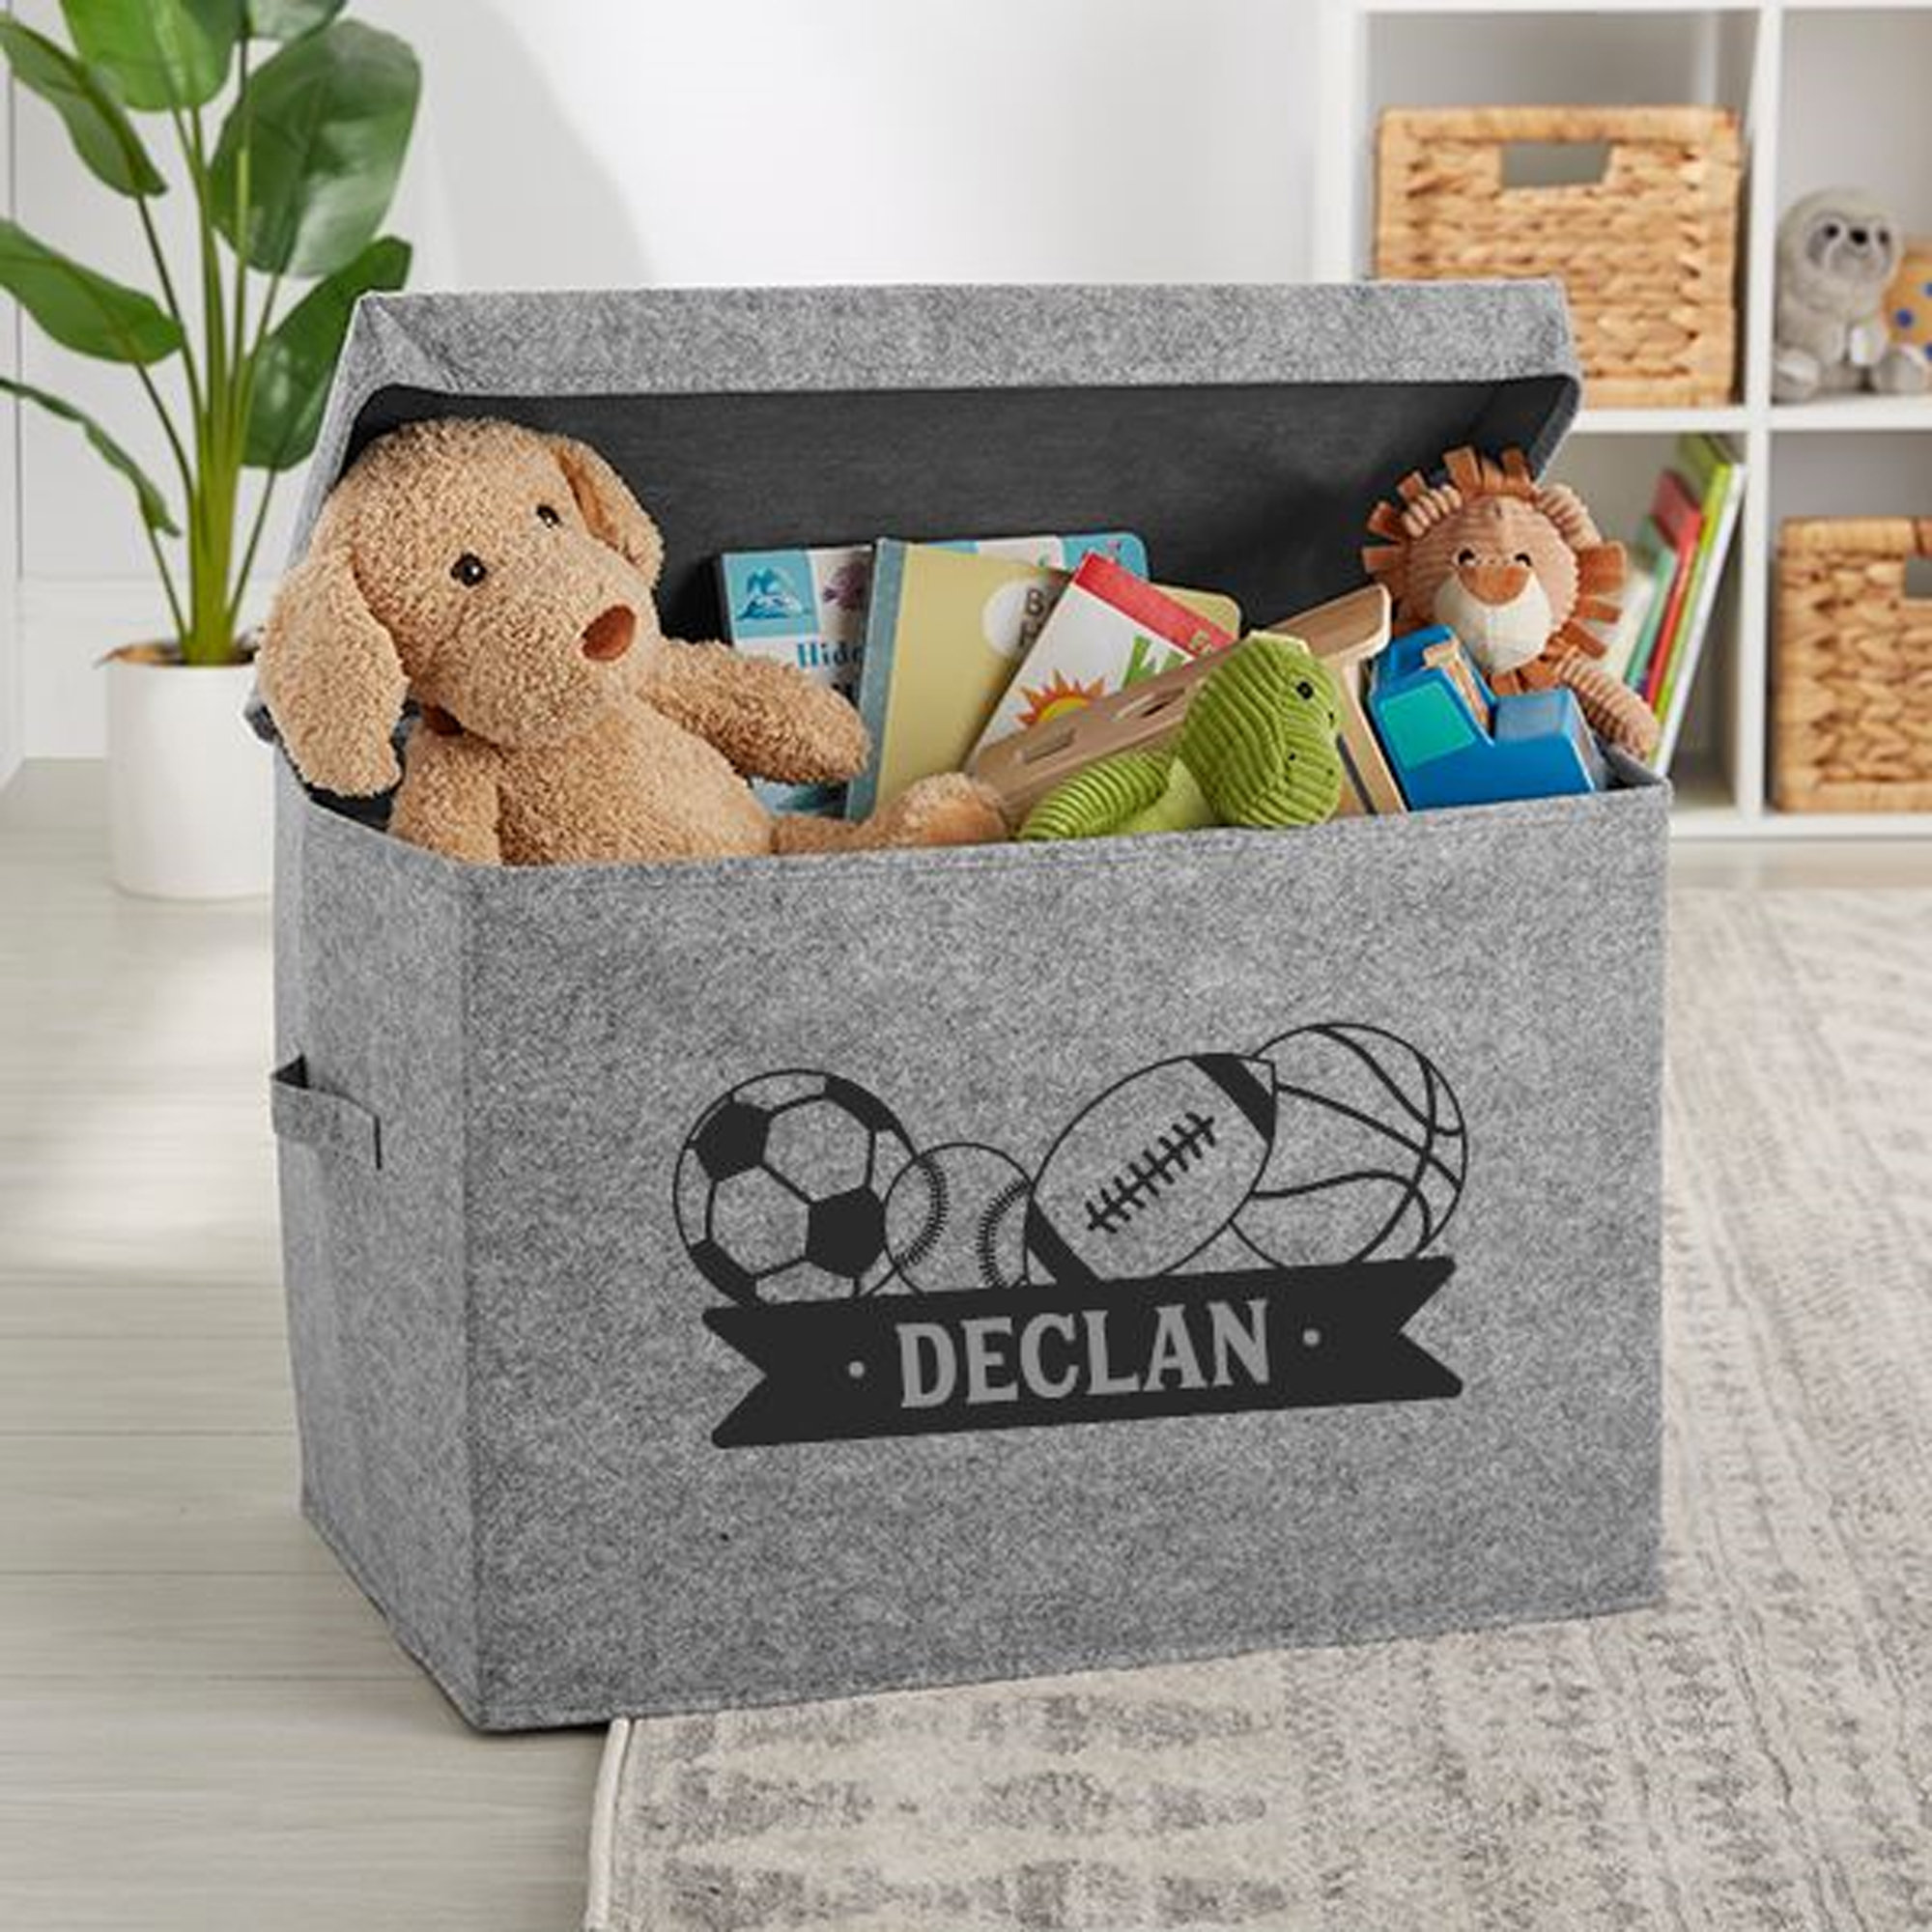 Jtj Sourcing  Blue Plastic Toy Organizers and Storage Toy Chest